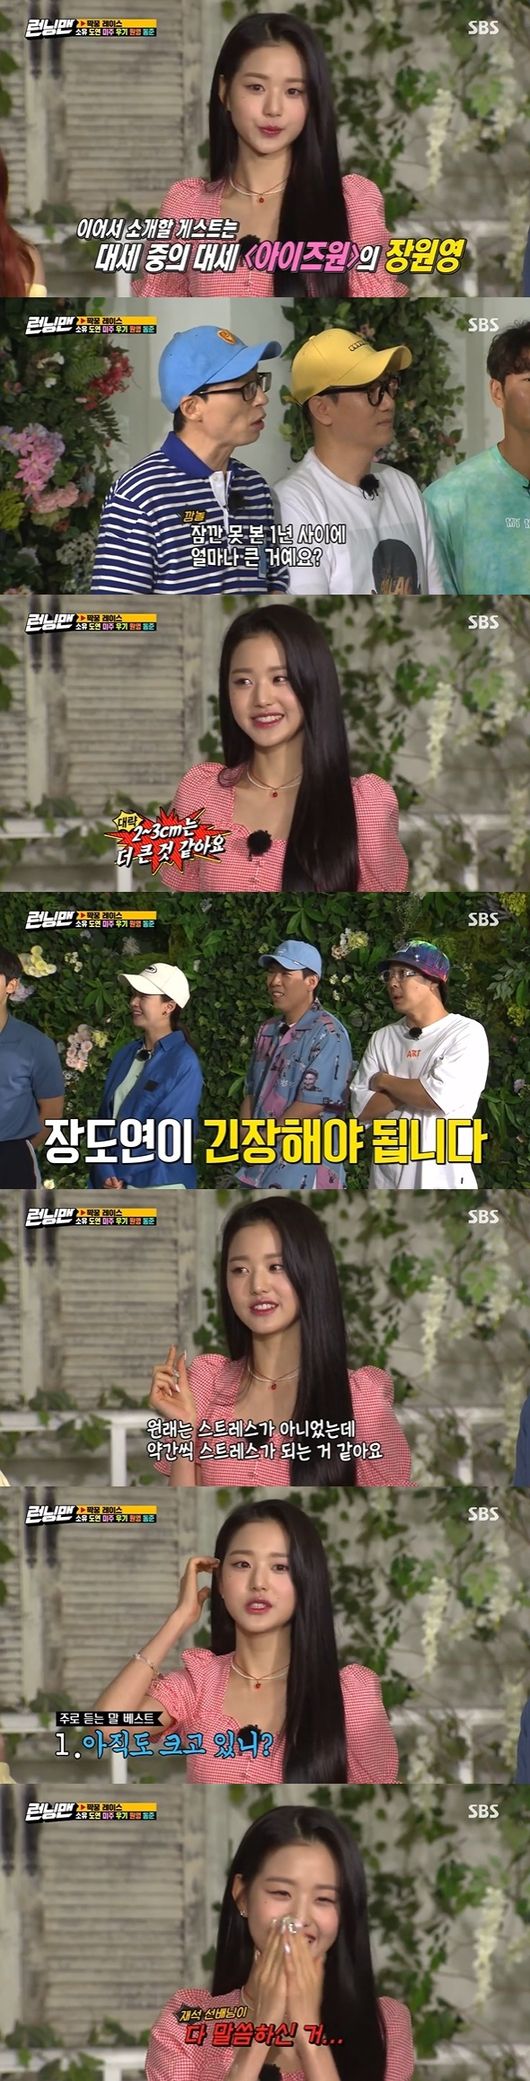 Running Man Jang Won-young is stressed on key questions, Confessions said.SBS Running Man, which was broadcasted on the afternoon of the 26th, was decorated with Pair Race, and guest Soyou, Wikimki Kim Do-yeon, Lovelys Miju, (girl) children Song Yuqi, IZ*ONE Jang Won-young and Kim Dong-jun appeared.Yoo Jae-Suk continued to talk individually one by one, introducing Soyou, Kim Do-yeon, Lee Mi-ju, Song Yuqi, Jang Won-young and Kim Dong-jun in turn.Jang Won-young, a girl group IZ*ONE, was born in 2004 and is the youngest, but he is the longest among guests. He is already over 170cm.Yoo Jae-Suk said, How tall was Won Young in a year you have not seen?I asked, and Jang Won-young replied, It was two to three centimeters bigger than when I met Park Jae-seok at the end.Around, he said, Gagwoman Jang Doyeon should be nervous; in profile, Jang Doyeon is 174cm tall.At this time, Lee Kwang-soo said, Honestly, I am nervous, I am nervous. Yoo Jae-Suk laughed at the knife.Yoo Jae-Suk said, Does Won Young not get stress because he has been tall around since he was tall?I asked, and Jang Won-young said, I originally heard so much about that that that was not a stress, but it is becoming a little stress. Jang Won-young also said, Is it still big? And It seems bigger ~.Park Jae-seok told me everything today, he laughed at the fact violence.Yoo Jae-Suk immediately apologized for being sorry, while Lee Kwang-soo begged, Why are you giving me this stress?The ending fairy Jang Won-young caught the eye by showing a full-fledged expression of IZ*ONEs fantastic fairy tale.On this day, Jang Won-young paired Lee Kwang-soo and performed mission.Asked about the role model, he said, I like Jun Ji-hyun, and Yoo Jae-Suk said, I used to shoot an advertisement once, and Jun Ji-hyun can not call it.I can not get out, he said, revealing the top stars depression and laughing.Running Man screen captures